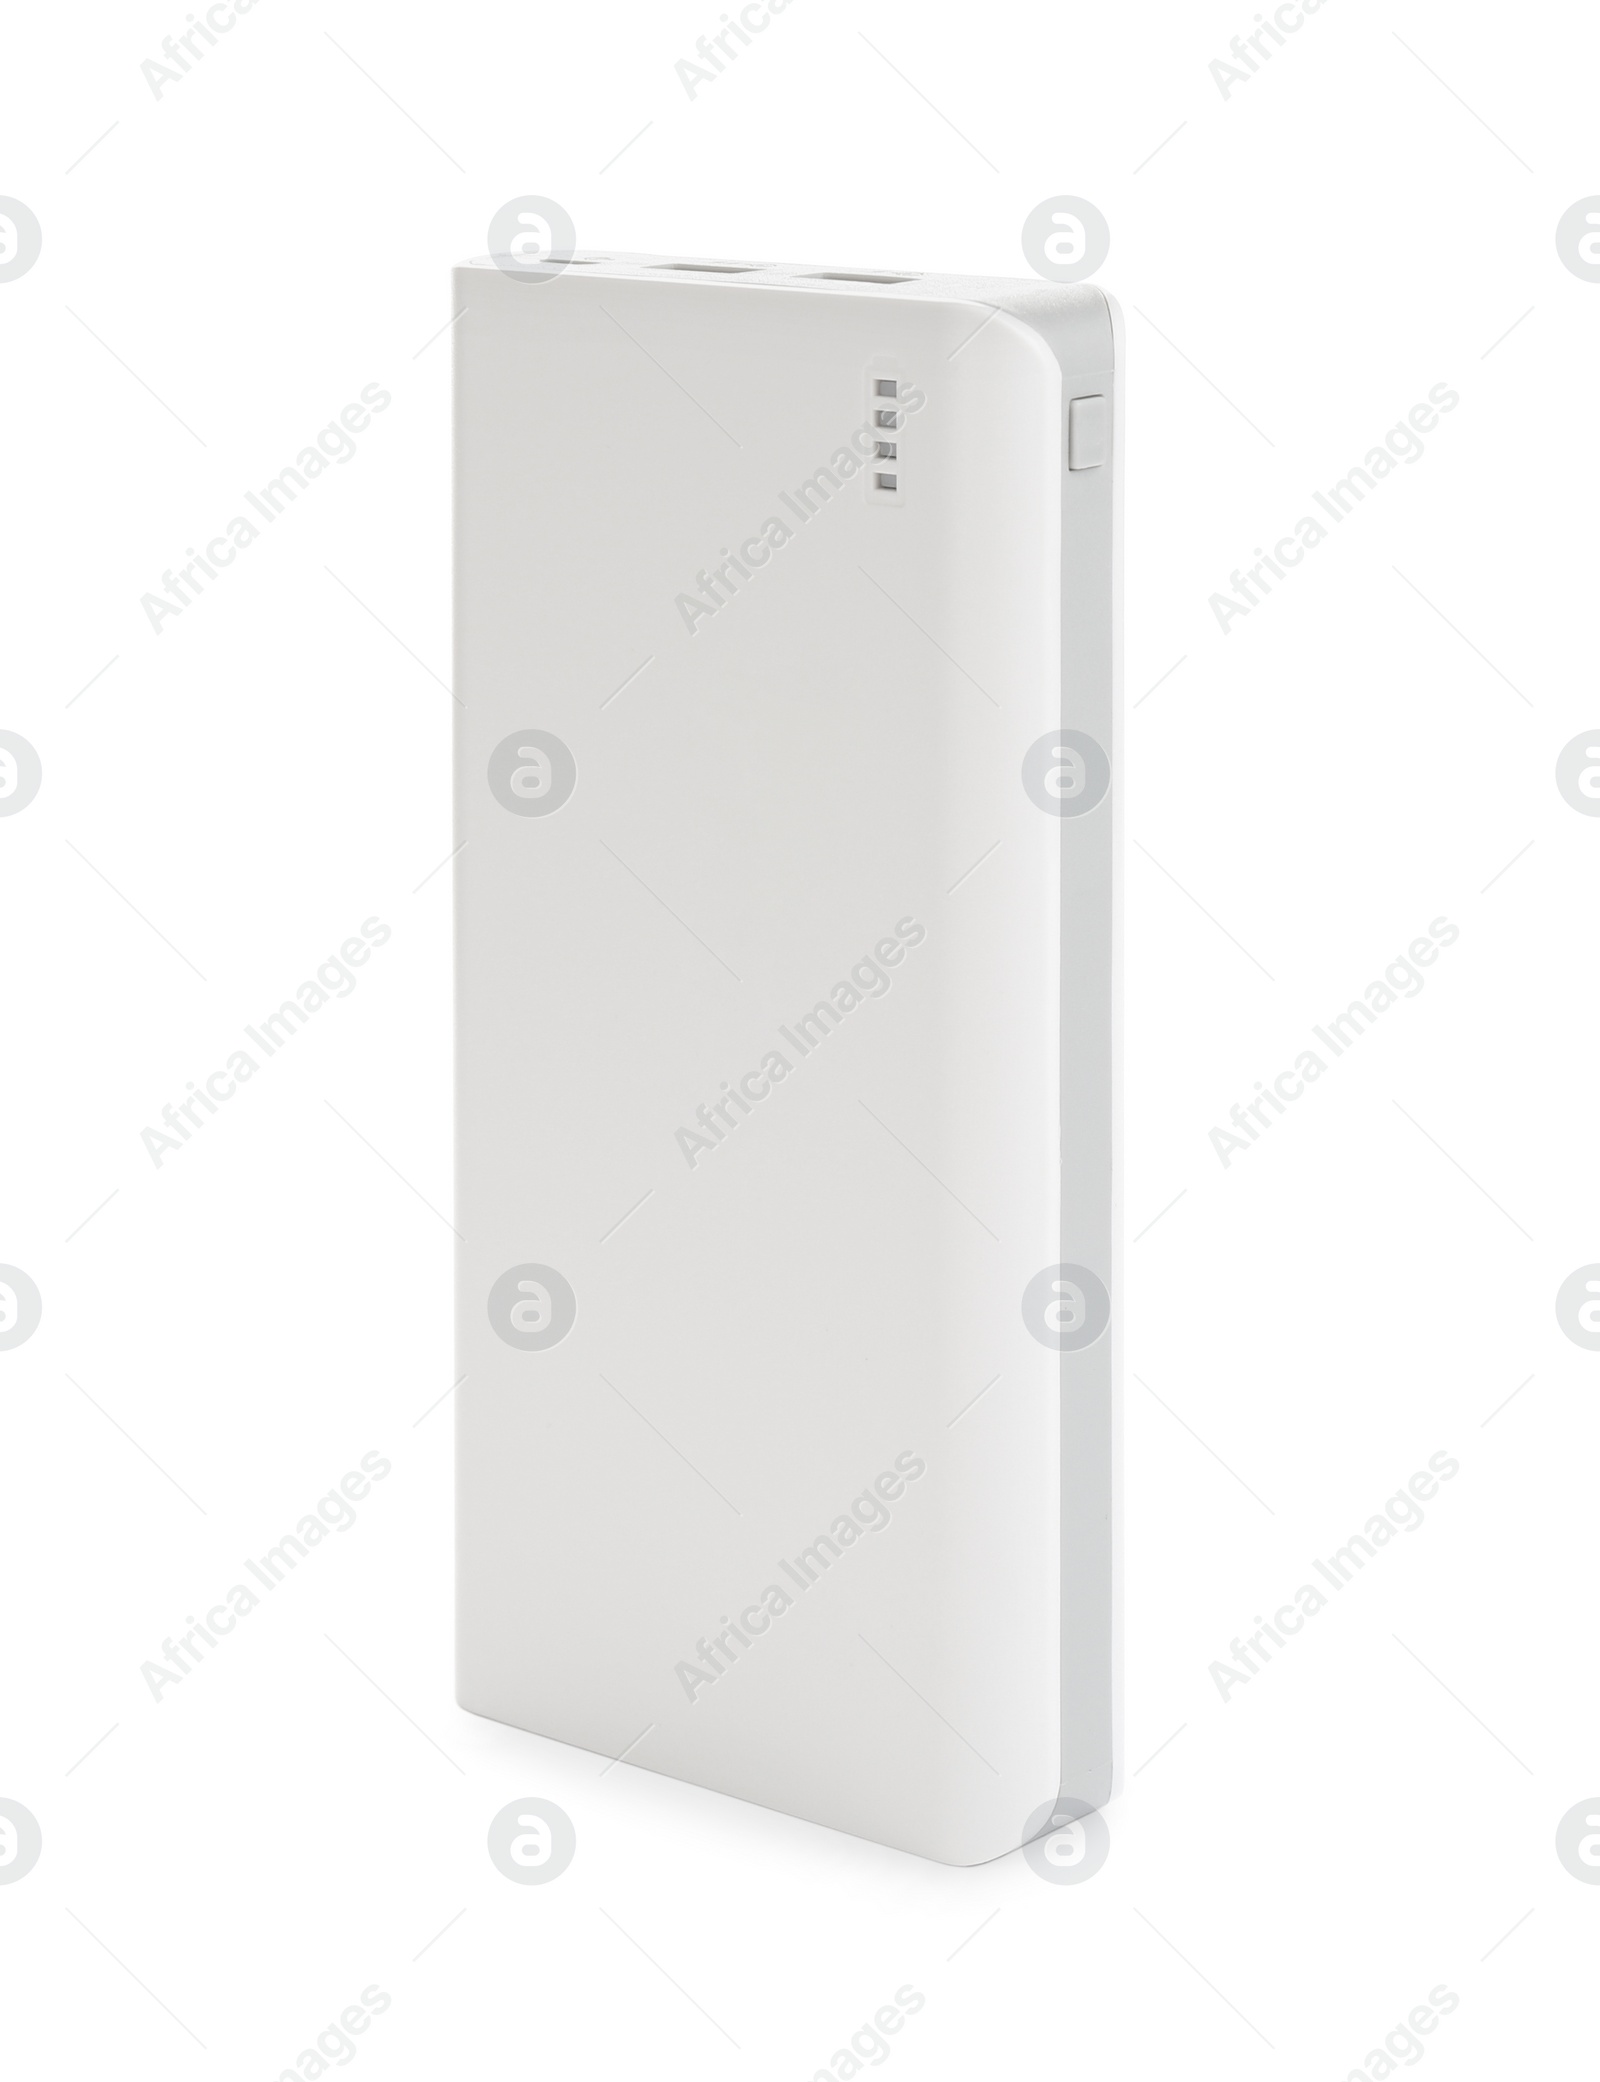 Photo of Modern external portable charger isolated on white